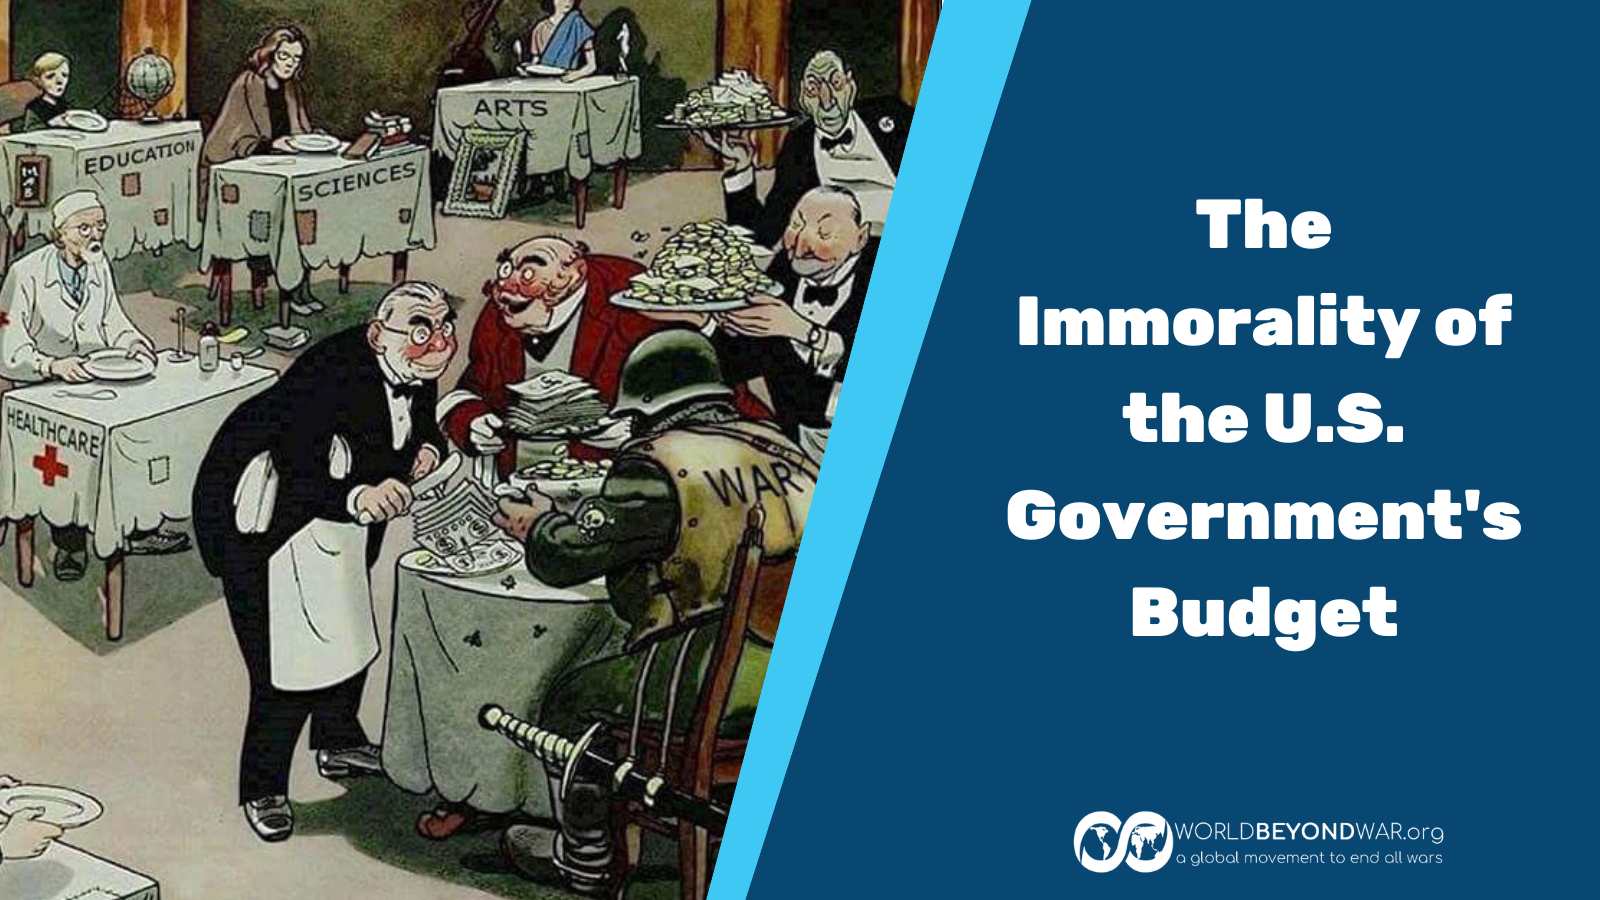 The Immorality of the U.S. Government’s Budget